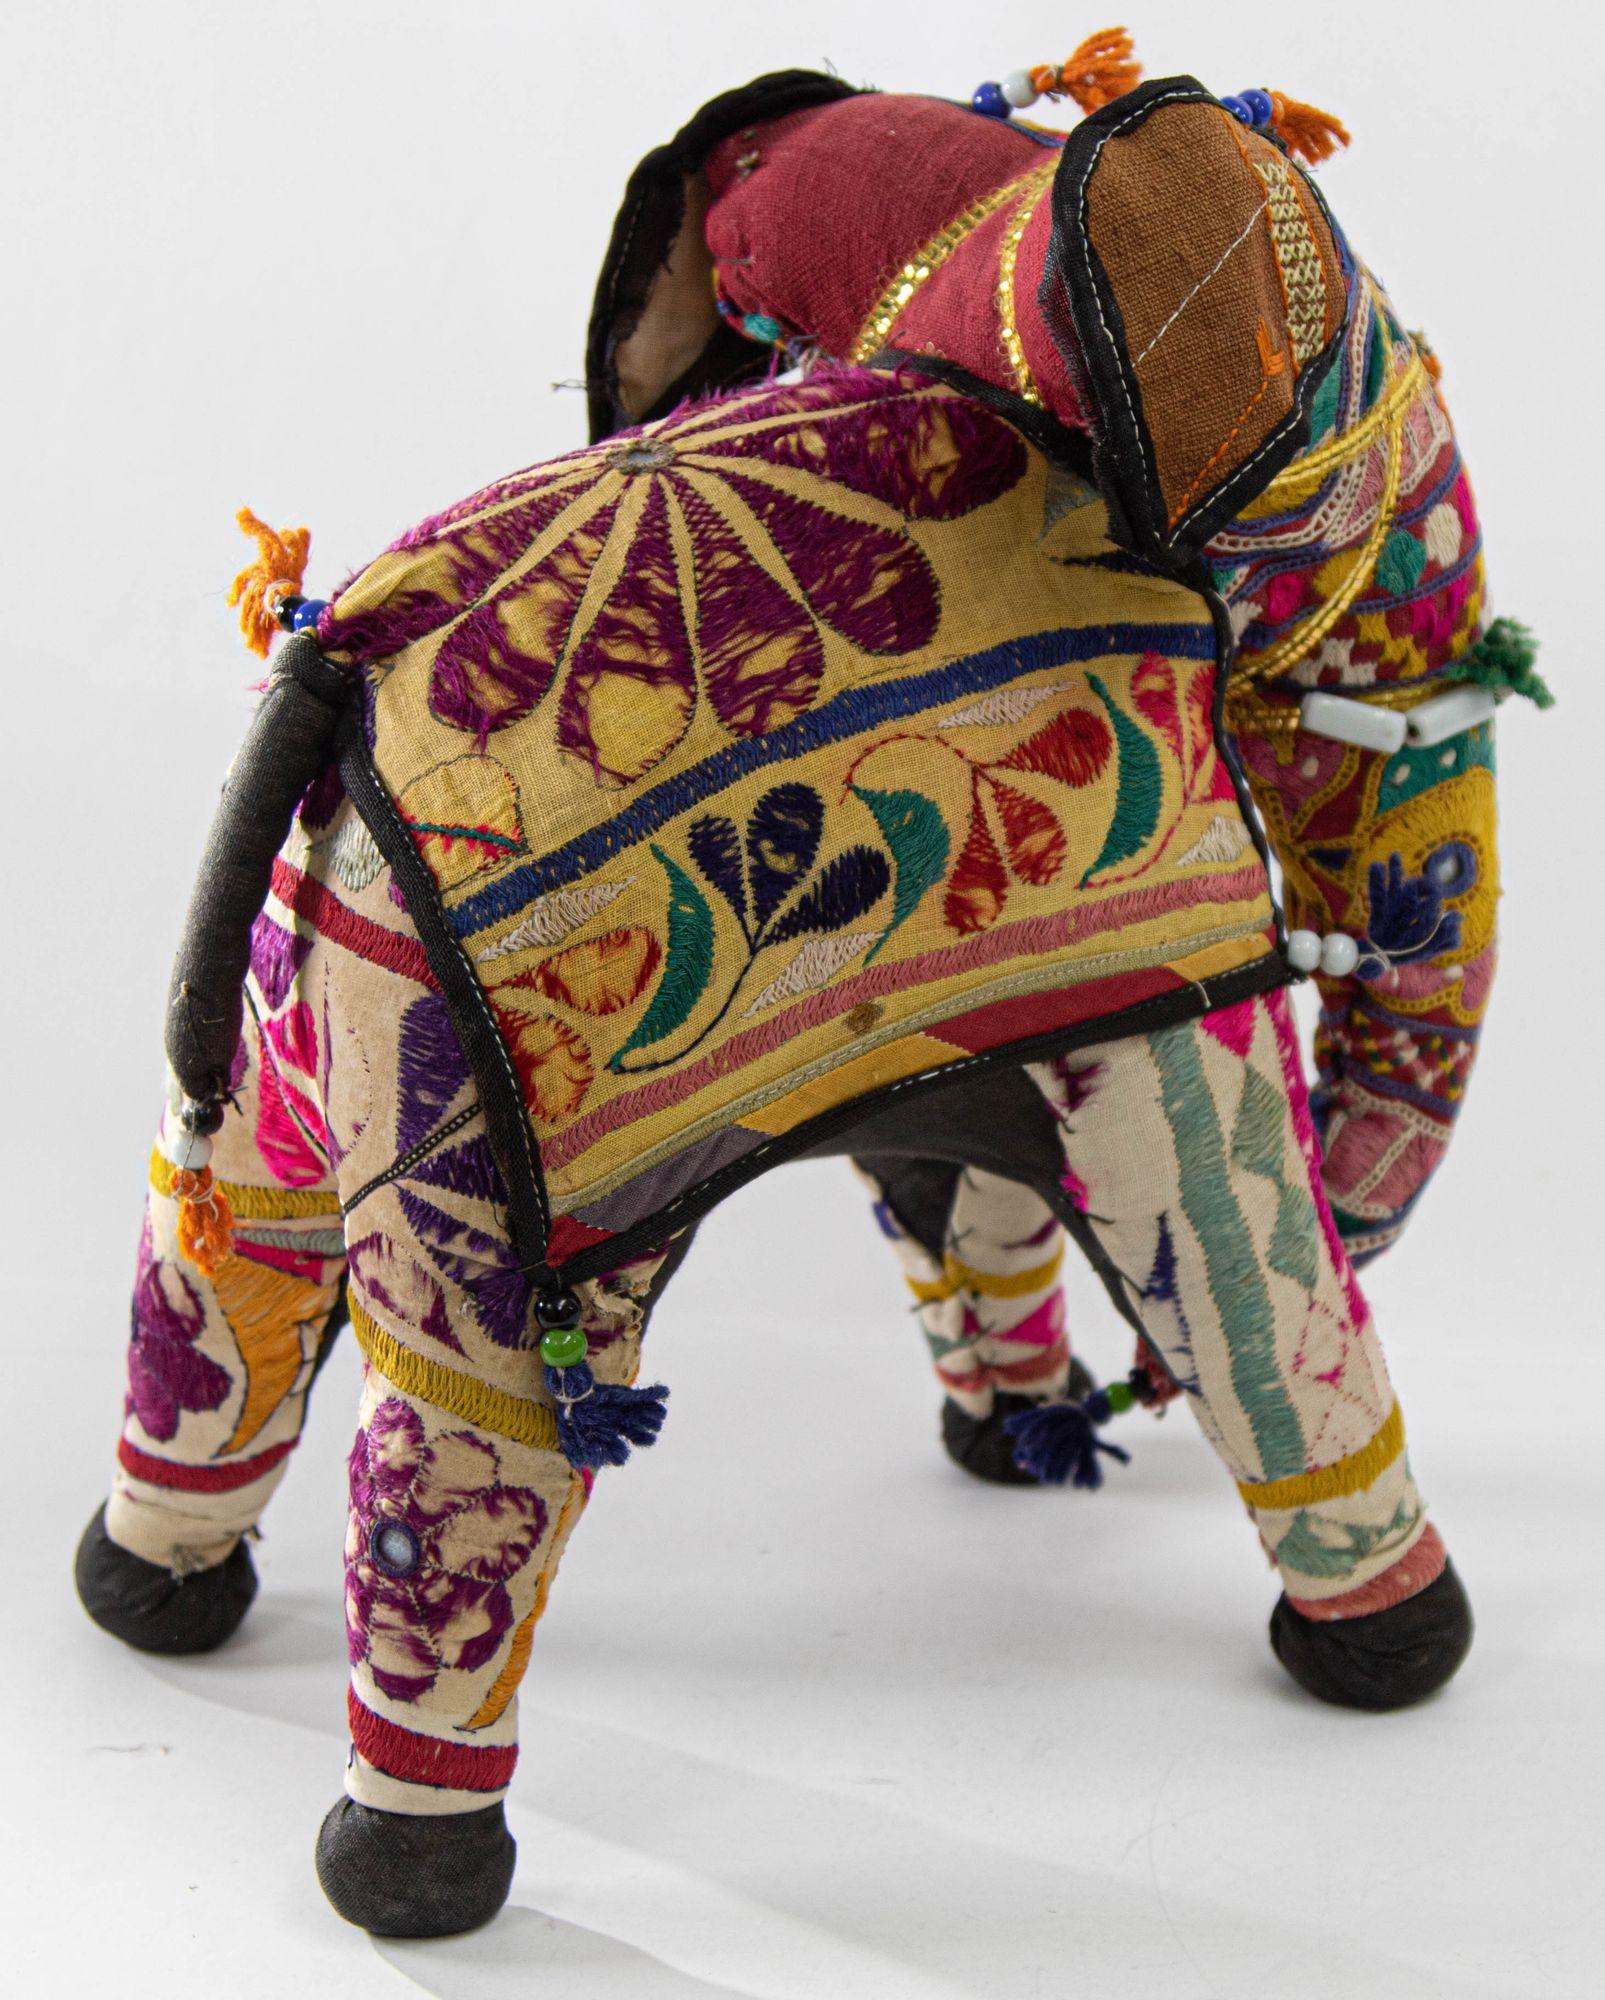 Vintage Handcrafted Stuffed Cotton Embroidered Ceremonial Elephant Toy Raj India en vente 5